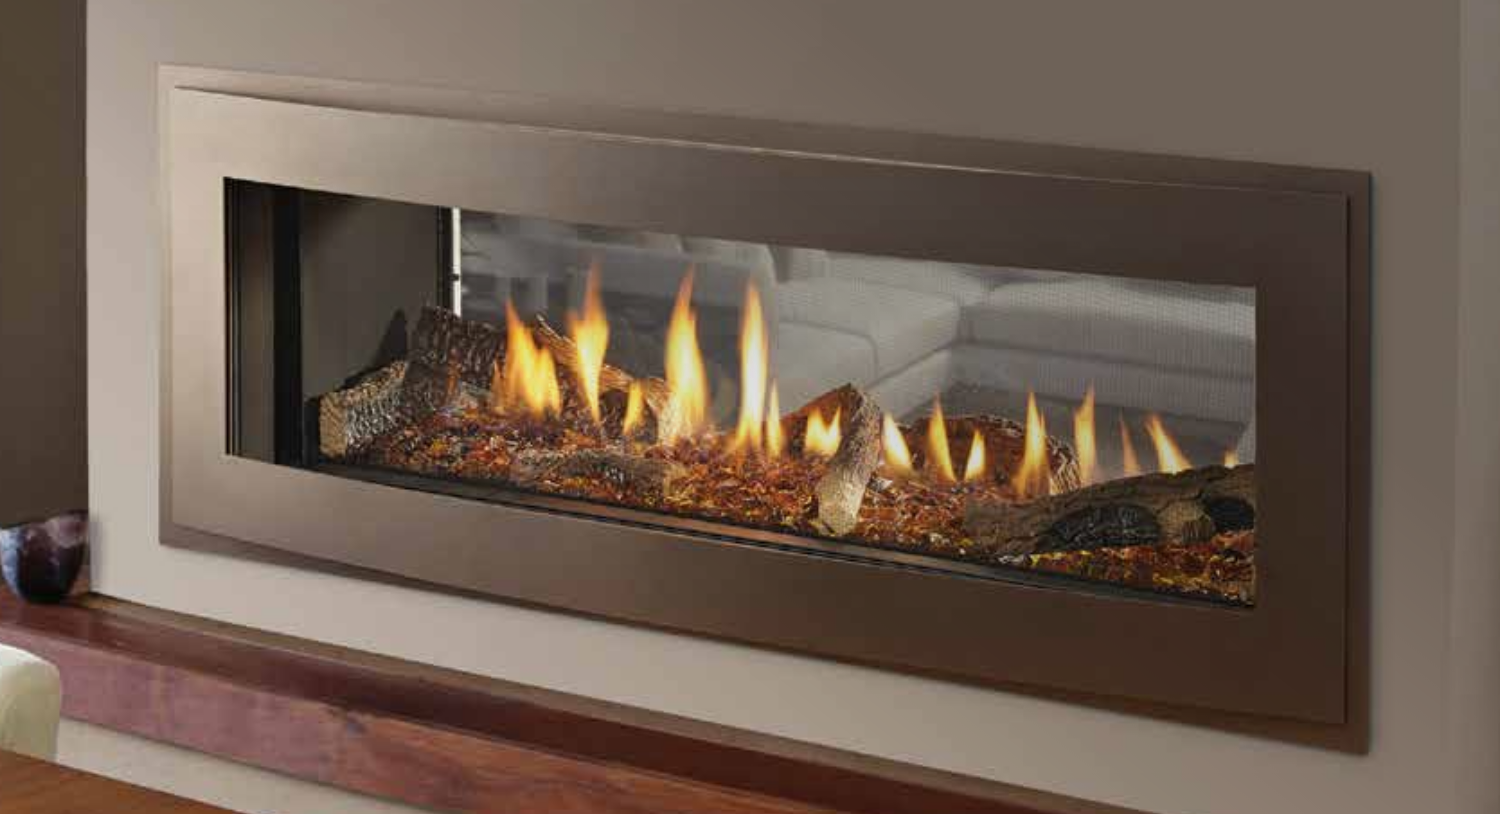 Crave Series Gas Fireplace is the best contemporary fireplace for you. Modern fireplaces at our fireplace store in San Jose